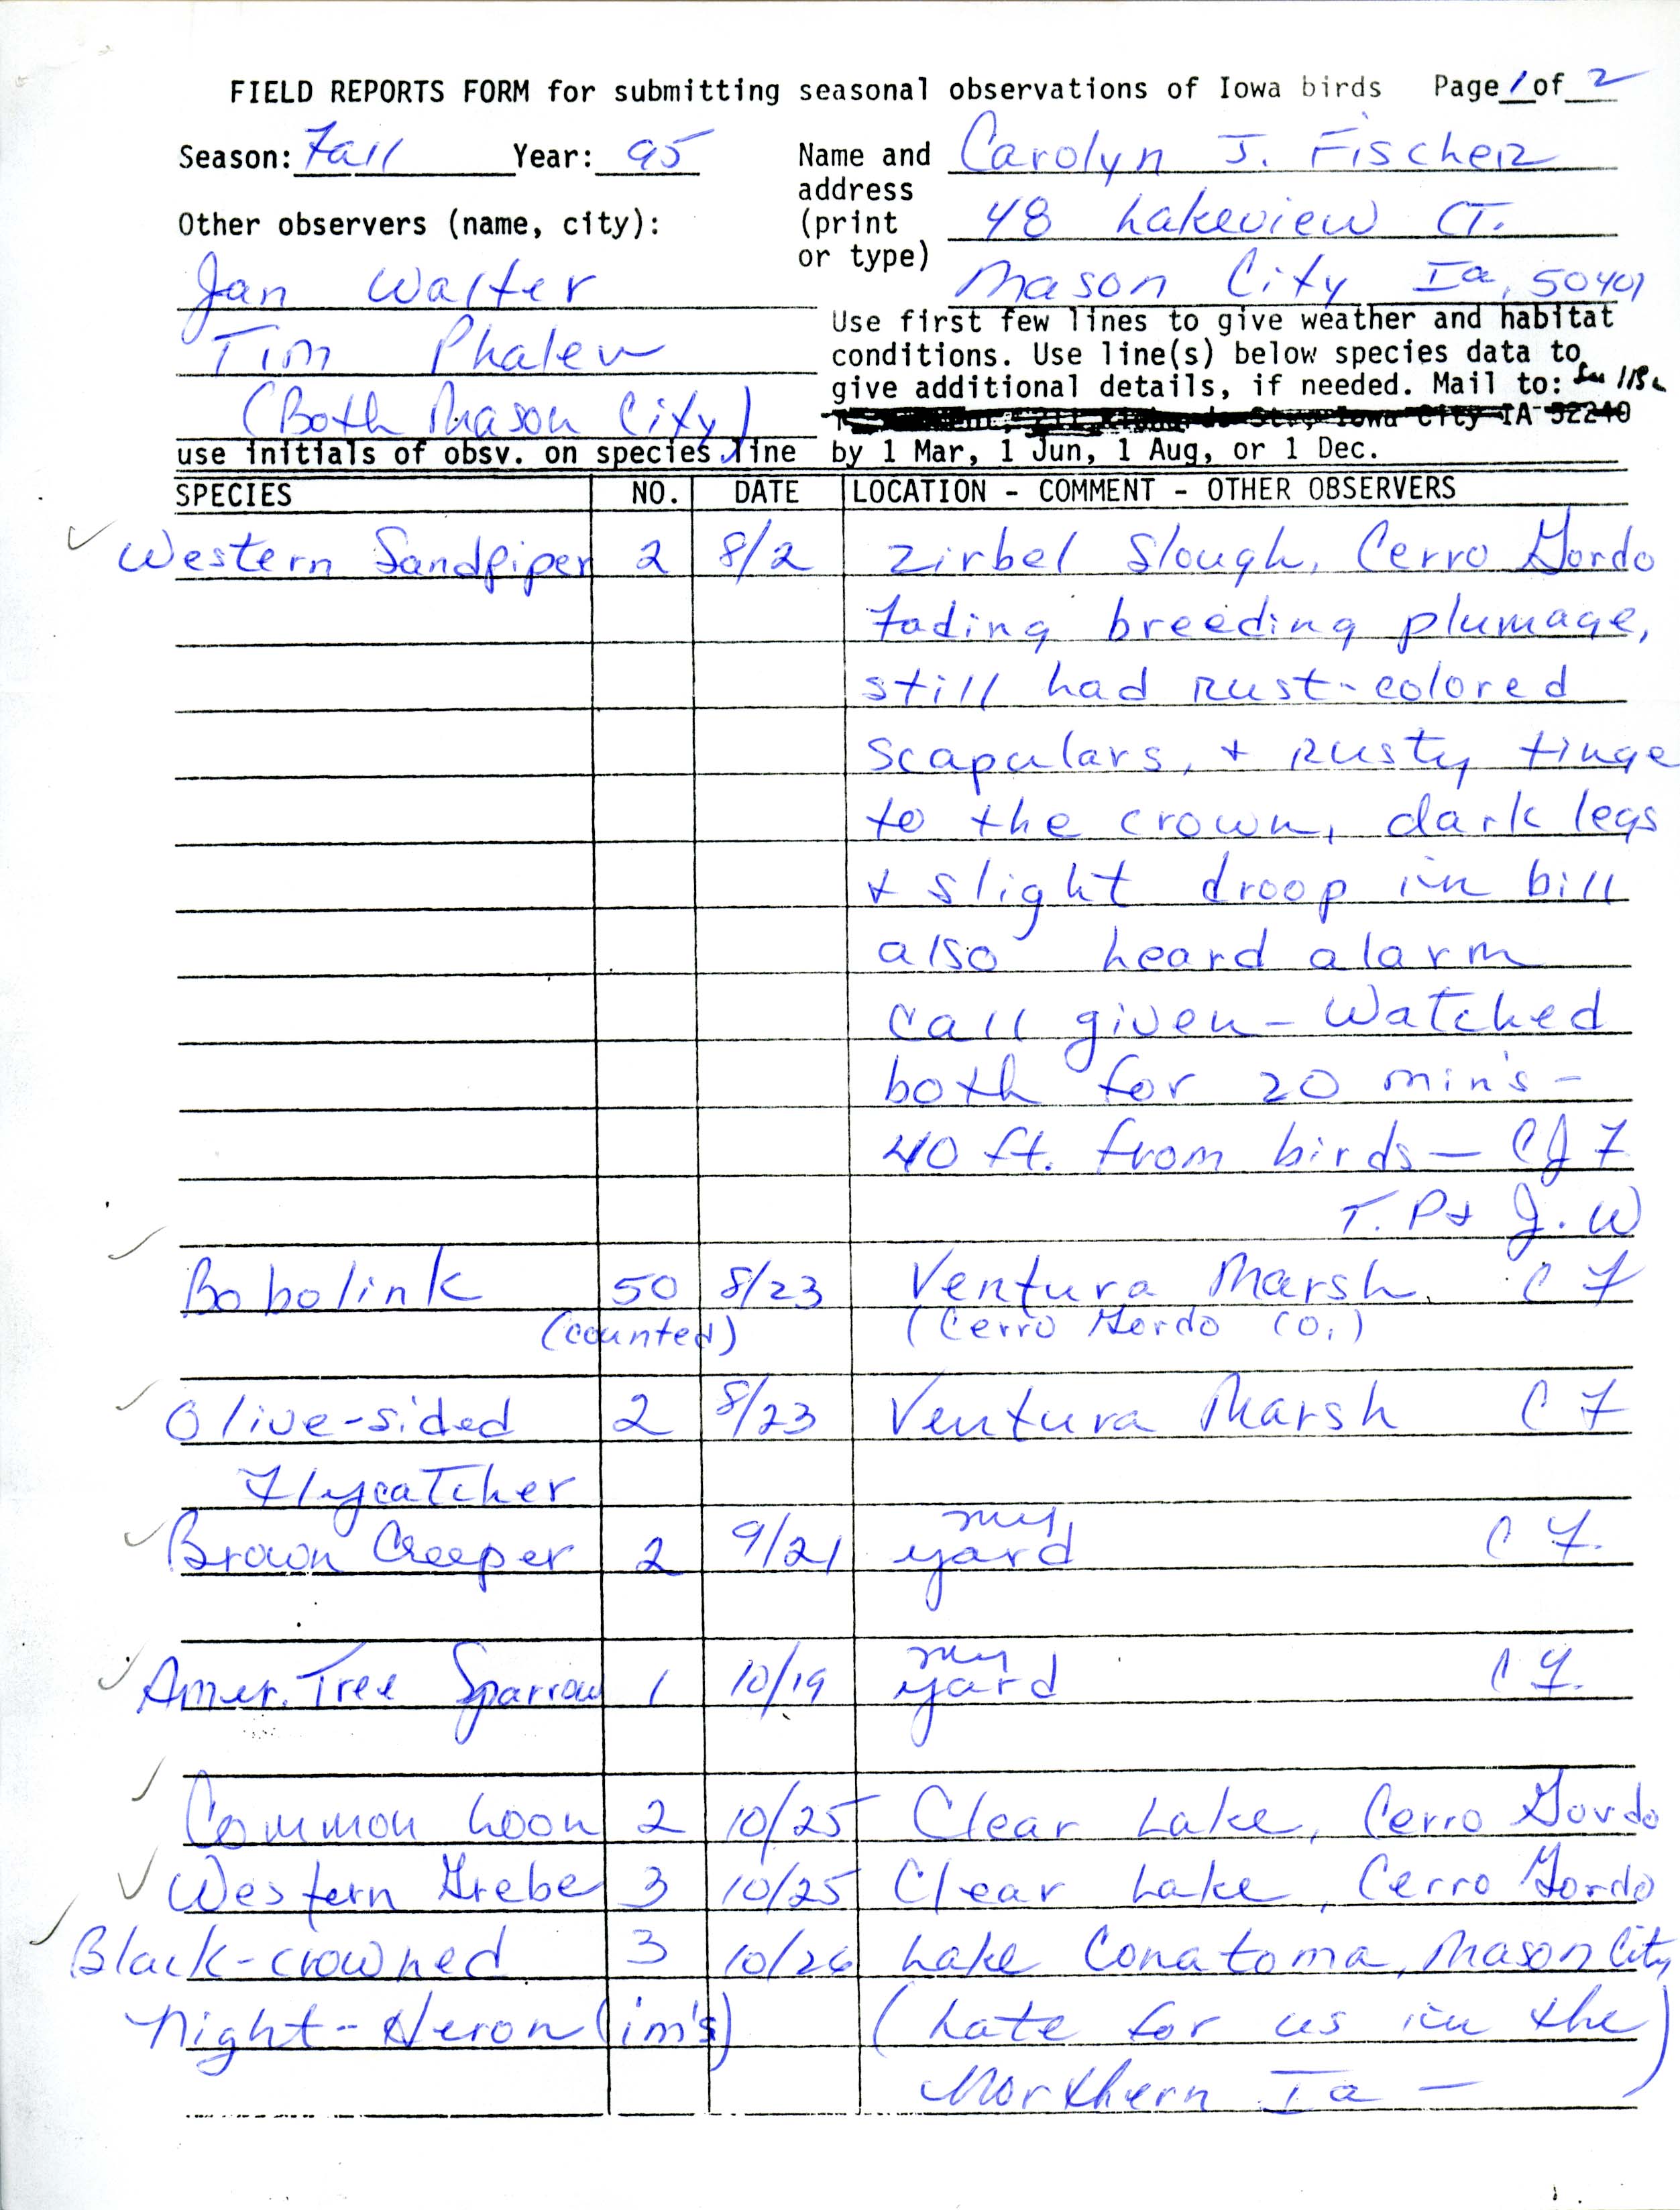 Field reports form for submitting seasonal observations of Iowa birds, Carolyn J. Fischer, fall 1995